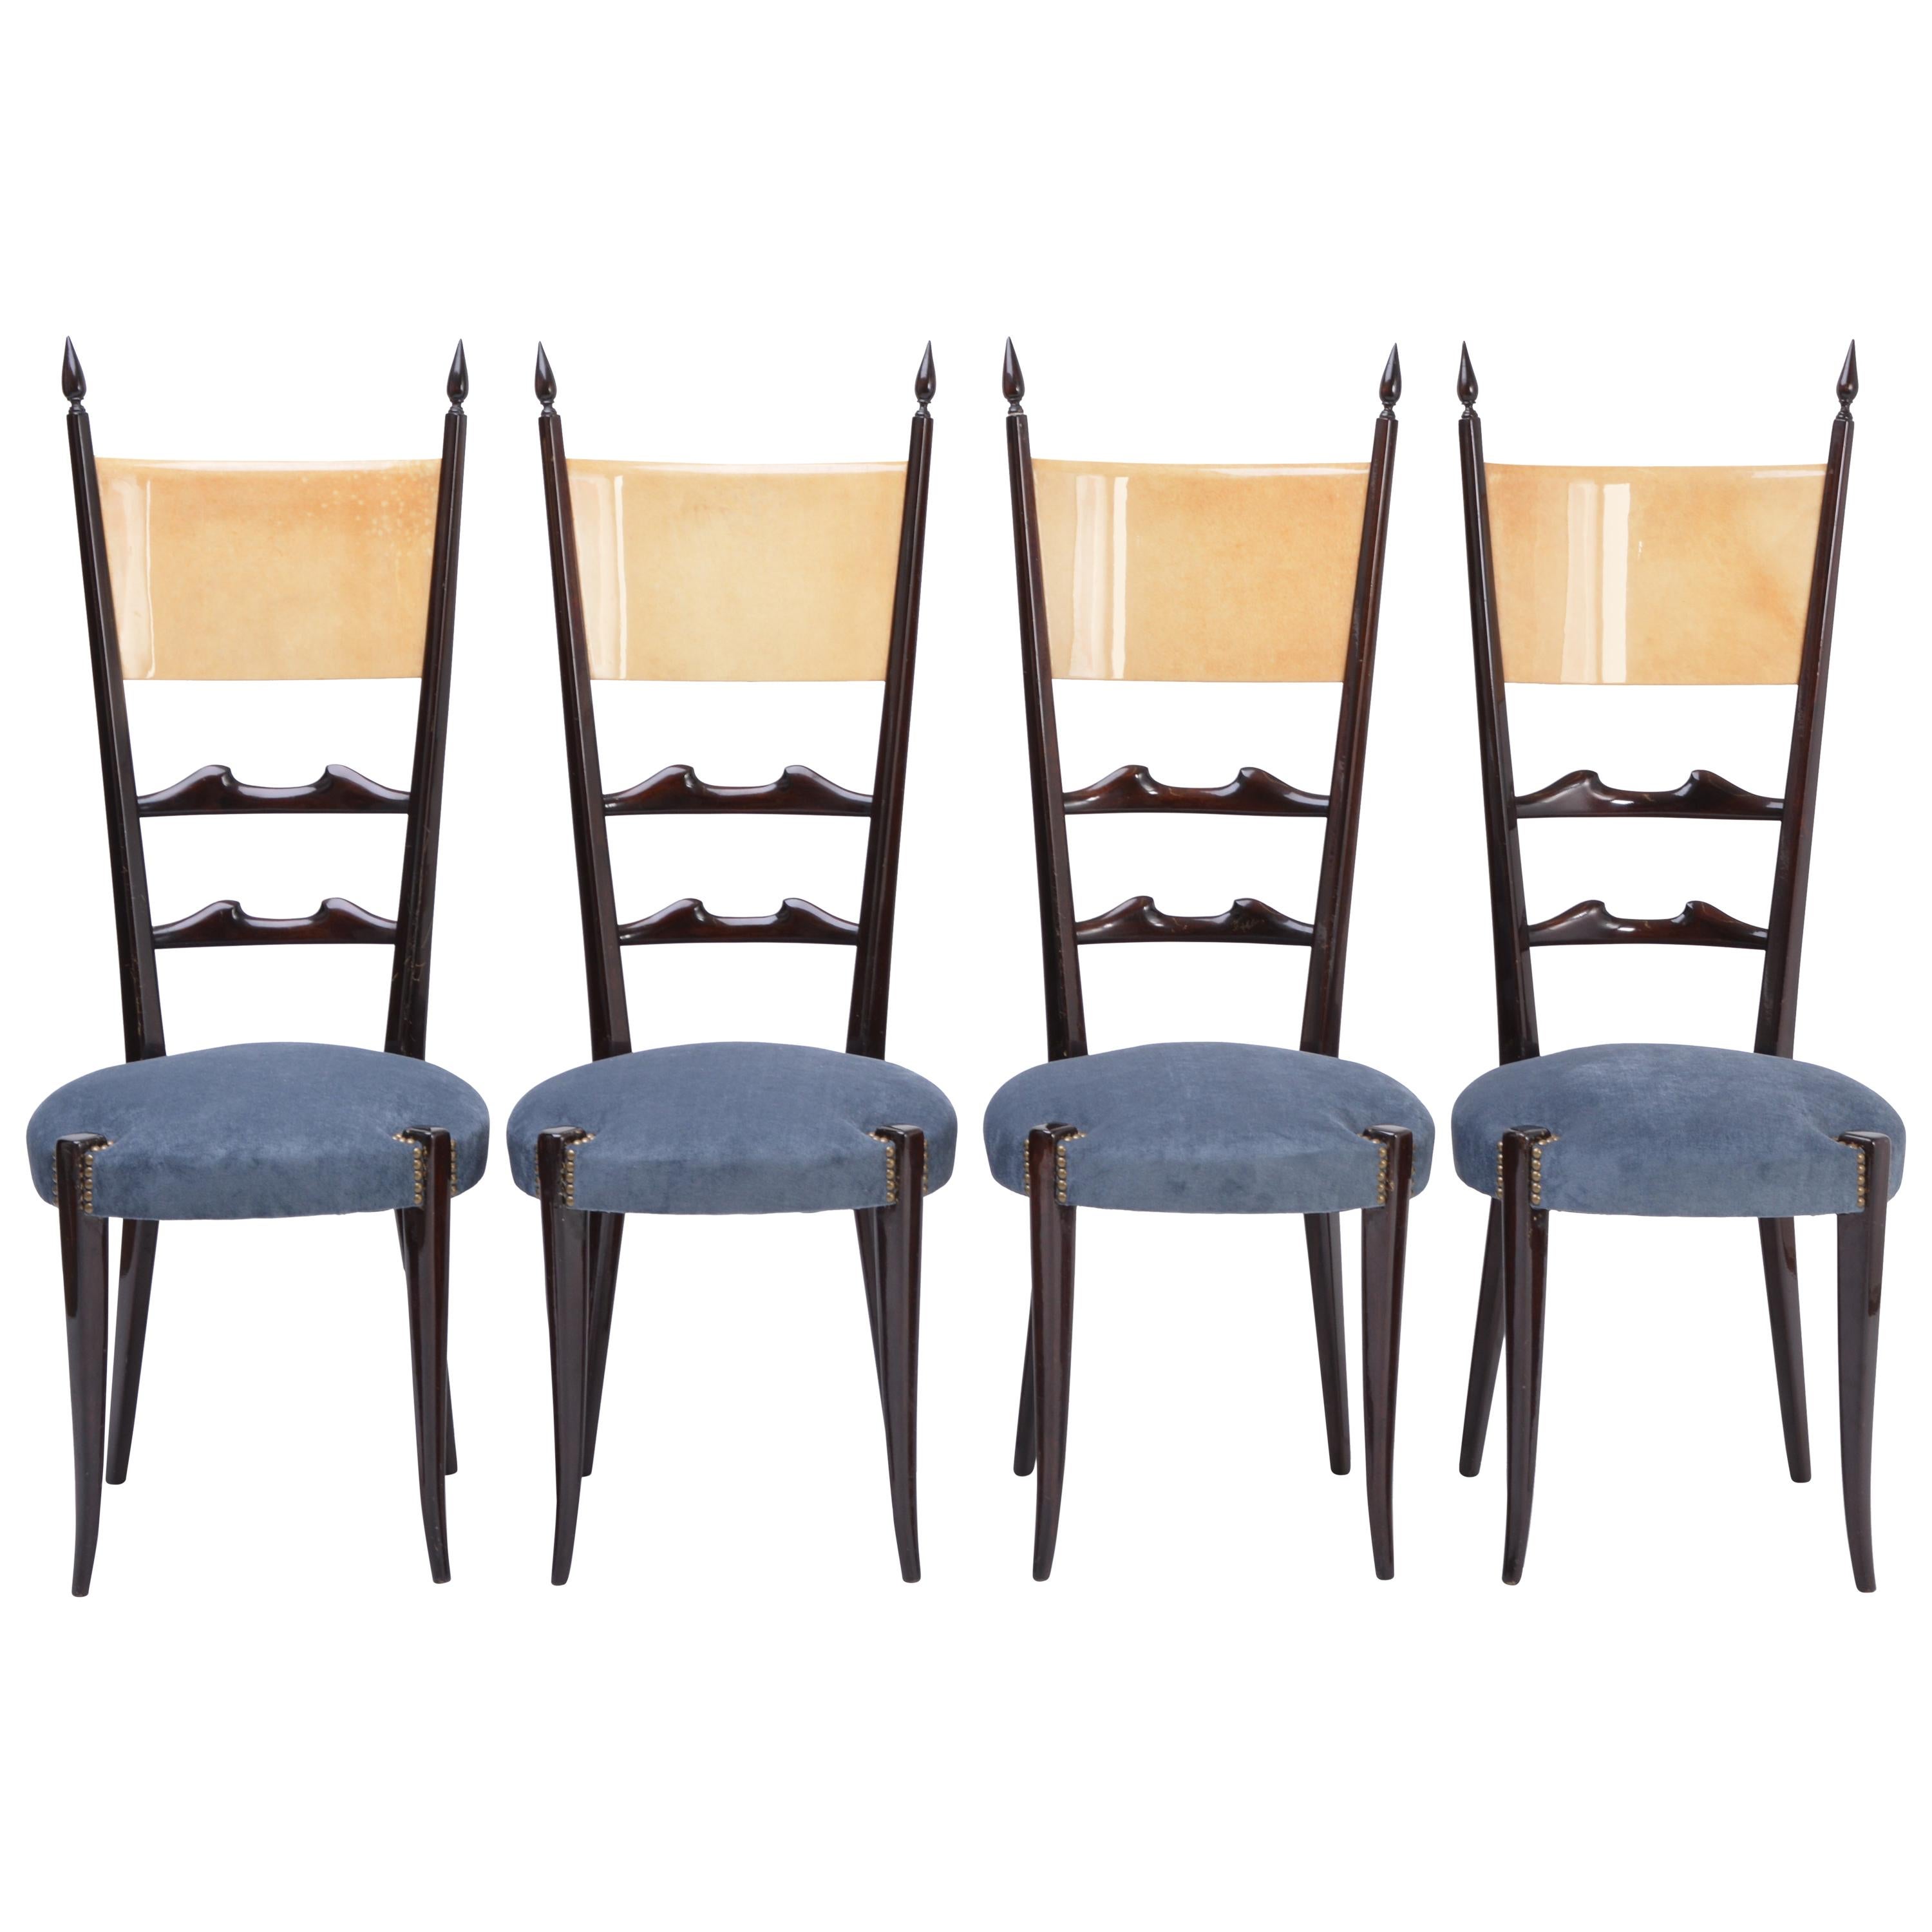 Set of four Italian Mid-Century Modern High Back dining chairs by Aldo Tura For Sale